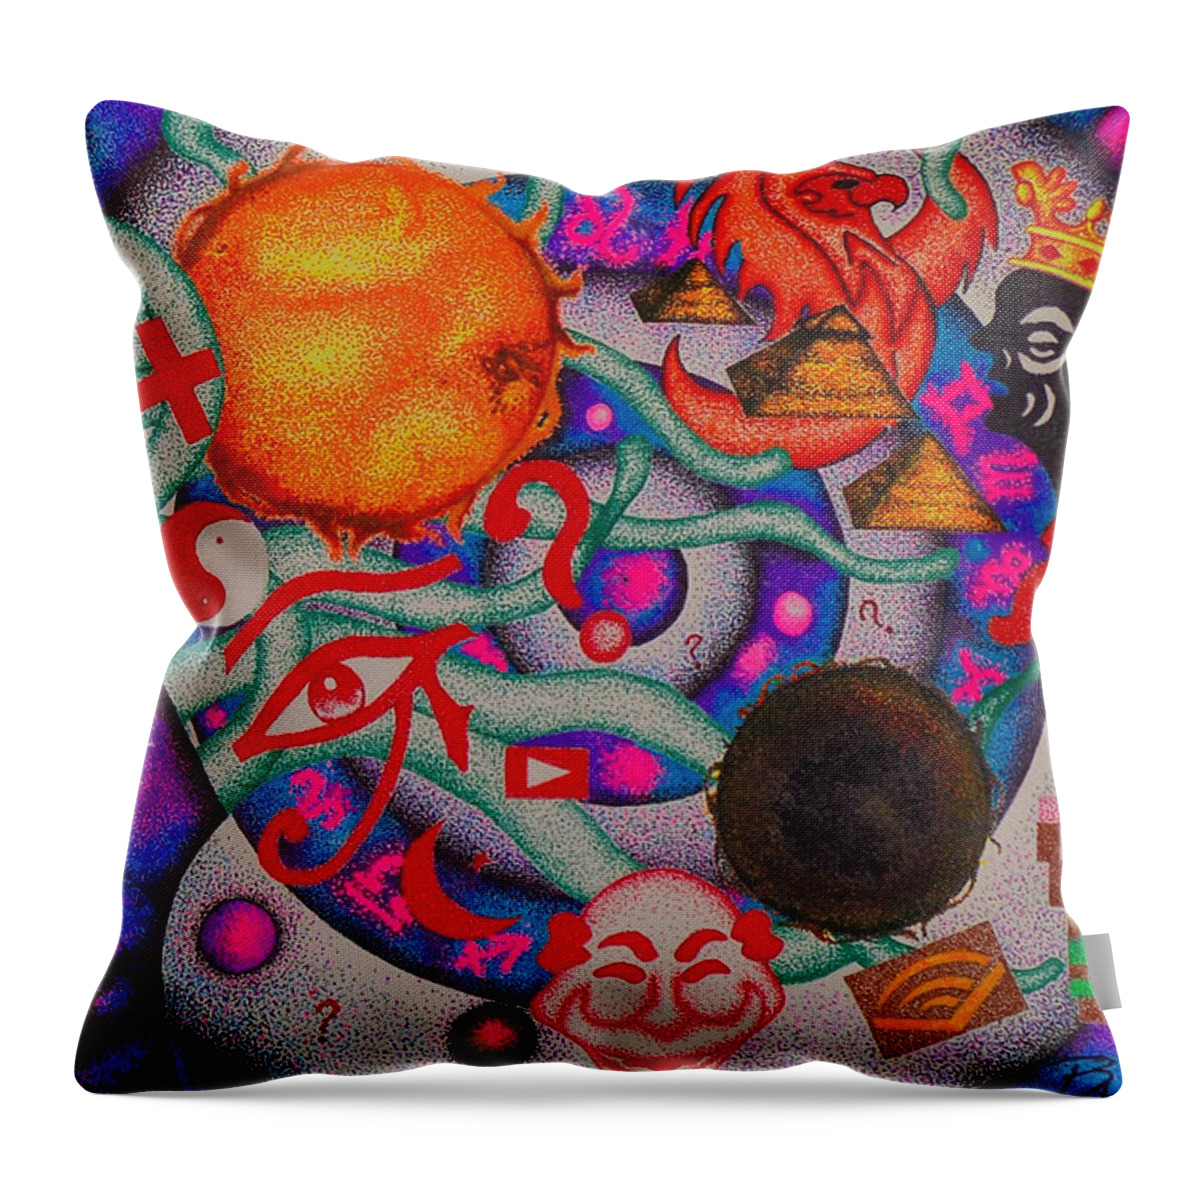 Space Throw Pillow featuring the mixed media Introverse by Brian L Hampshire